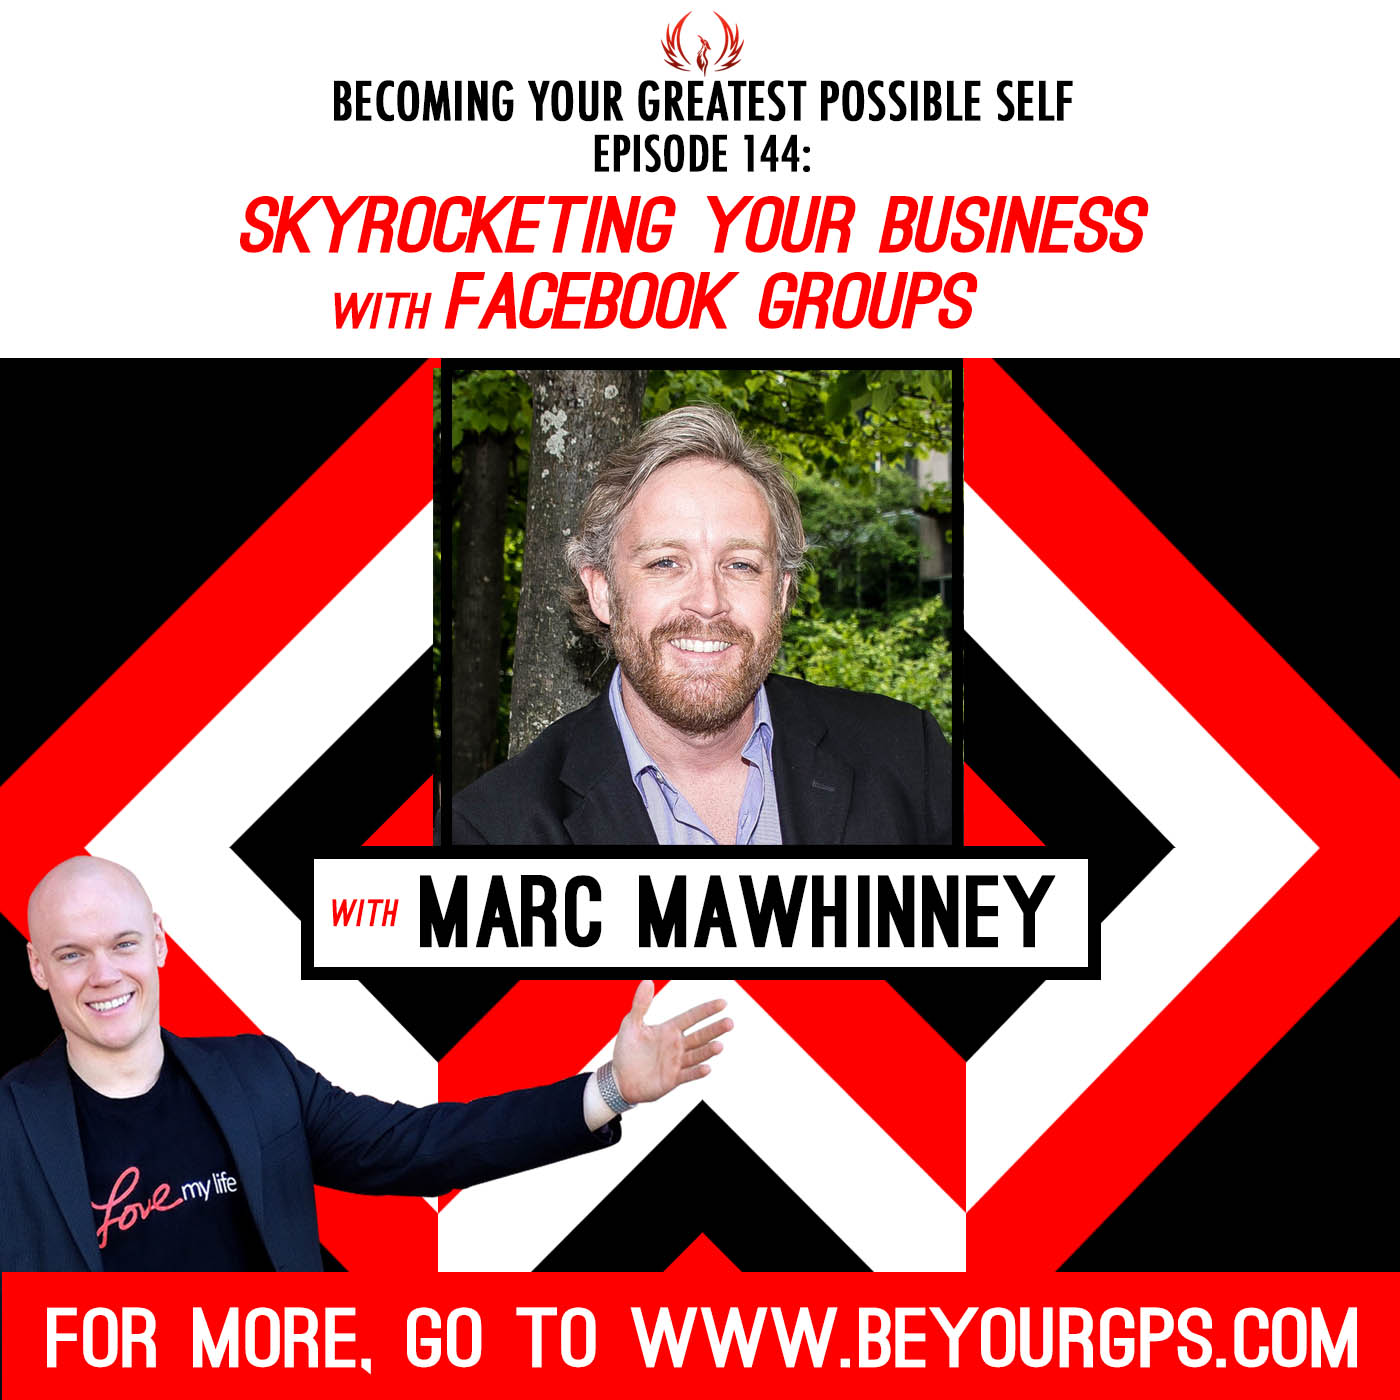 Skyrocketing Your Business With Facebook Groups with Marc Mawhinney